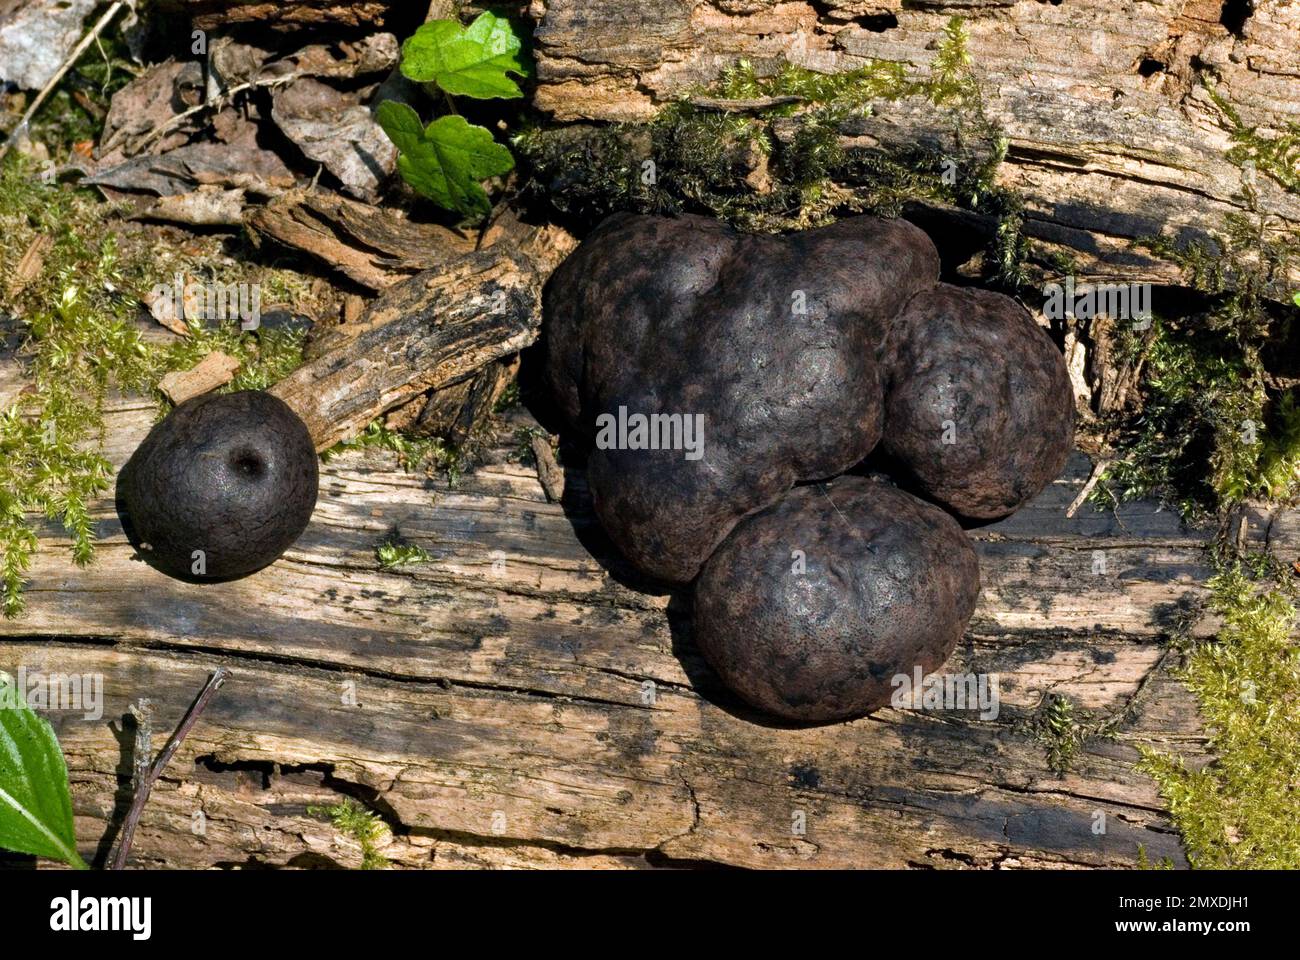 King Alfred's Cakes Fungus Stock Photo